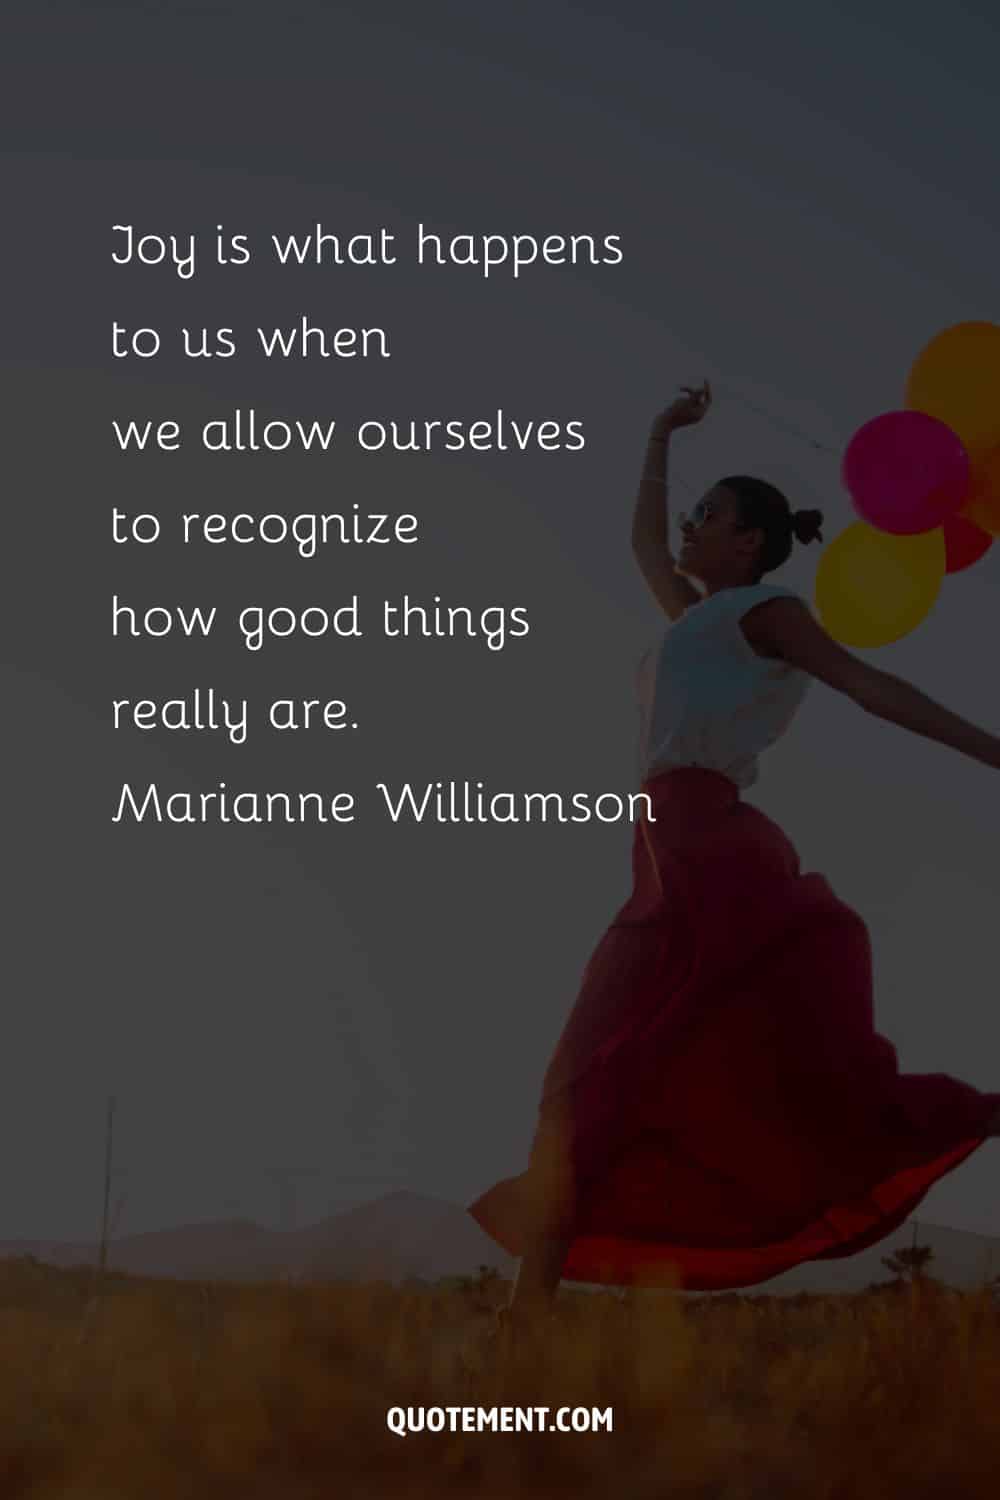 Joy is what happens to us when we allow ourselves to recognize how good things really are